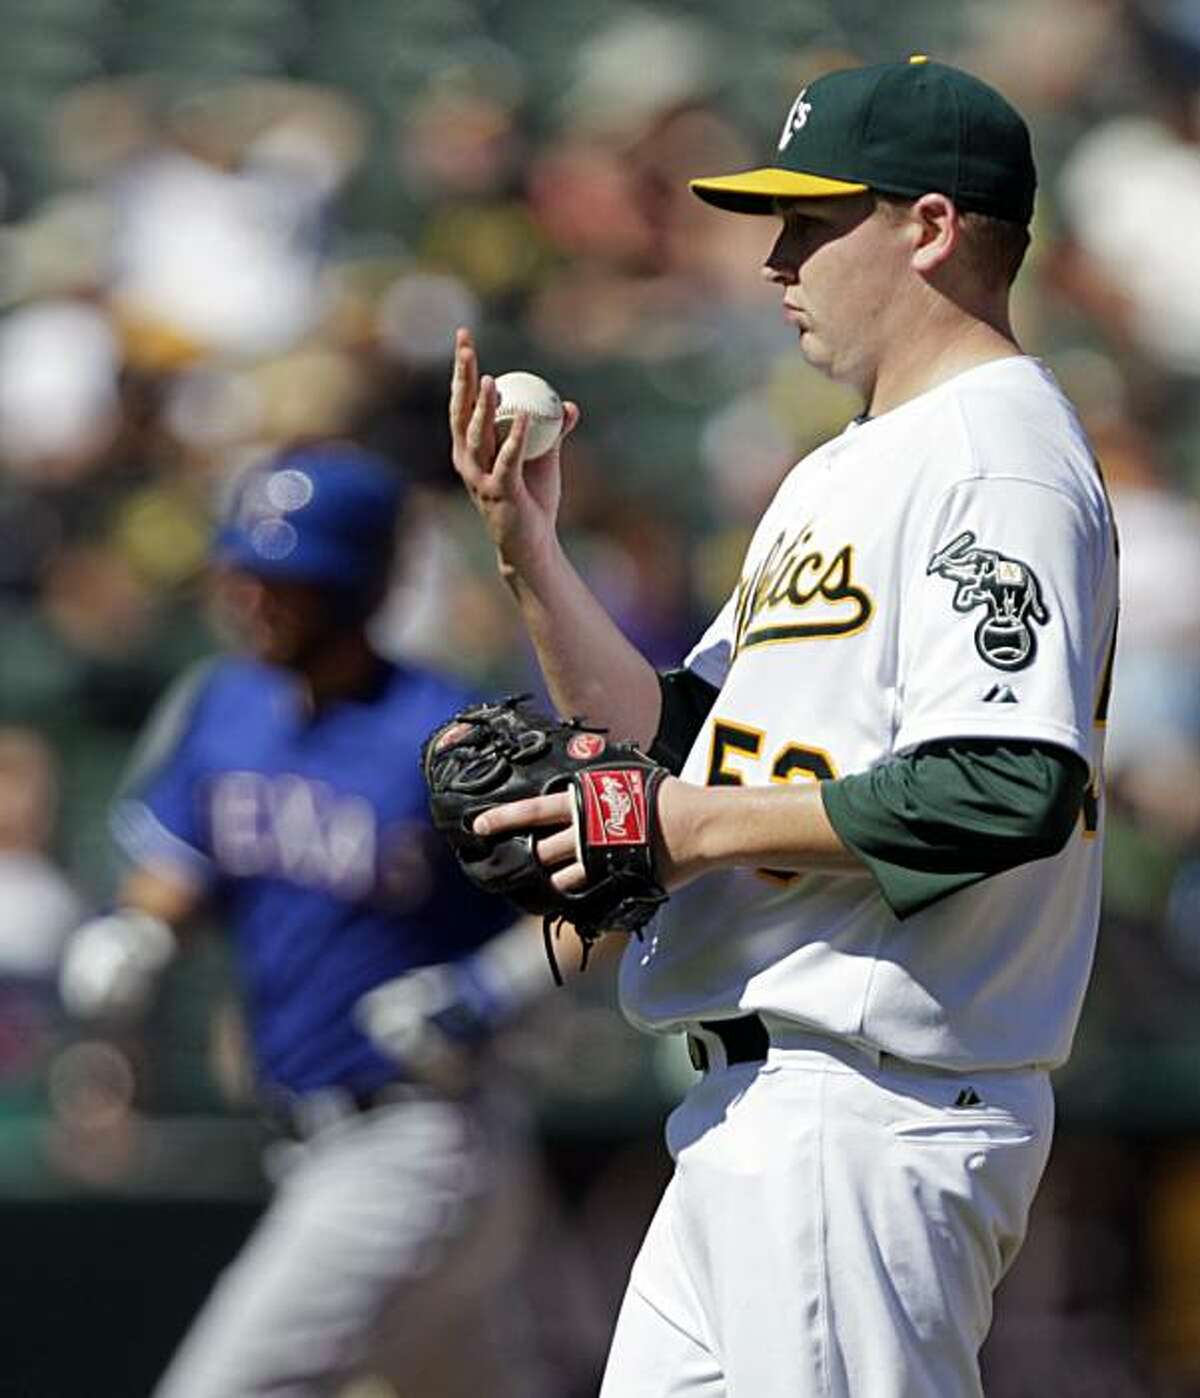 Oakland Athletics' Trevor Cahill, right, regroups as Texas Rangers' Jeff Francoeur, left, runs the bases after hitting a home run during the fourth inning of a baseball game Sunday, Sept. 26, 2010, in Oakland, Calif.